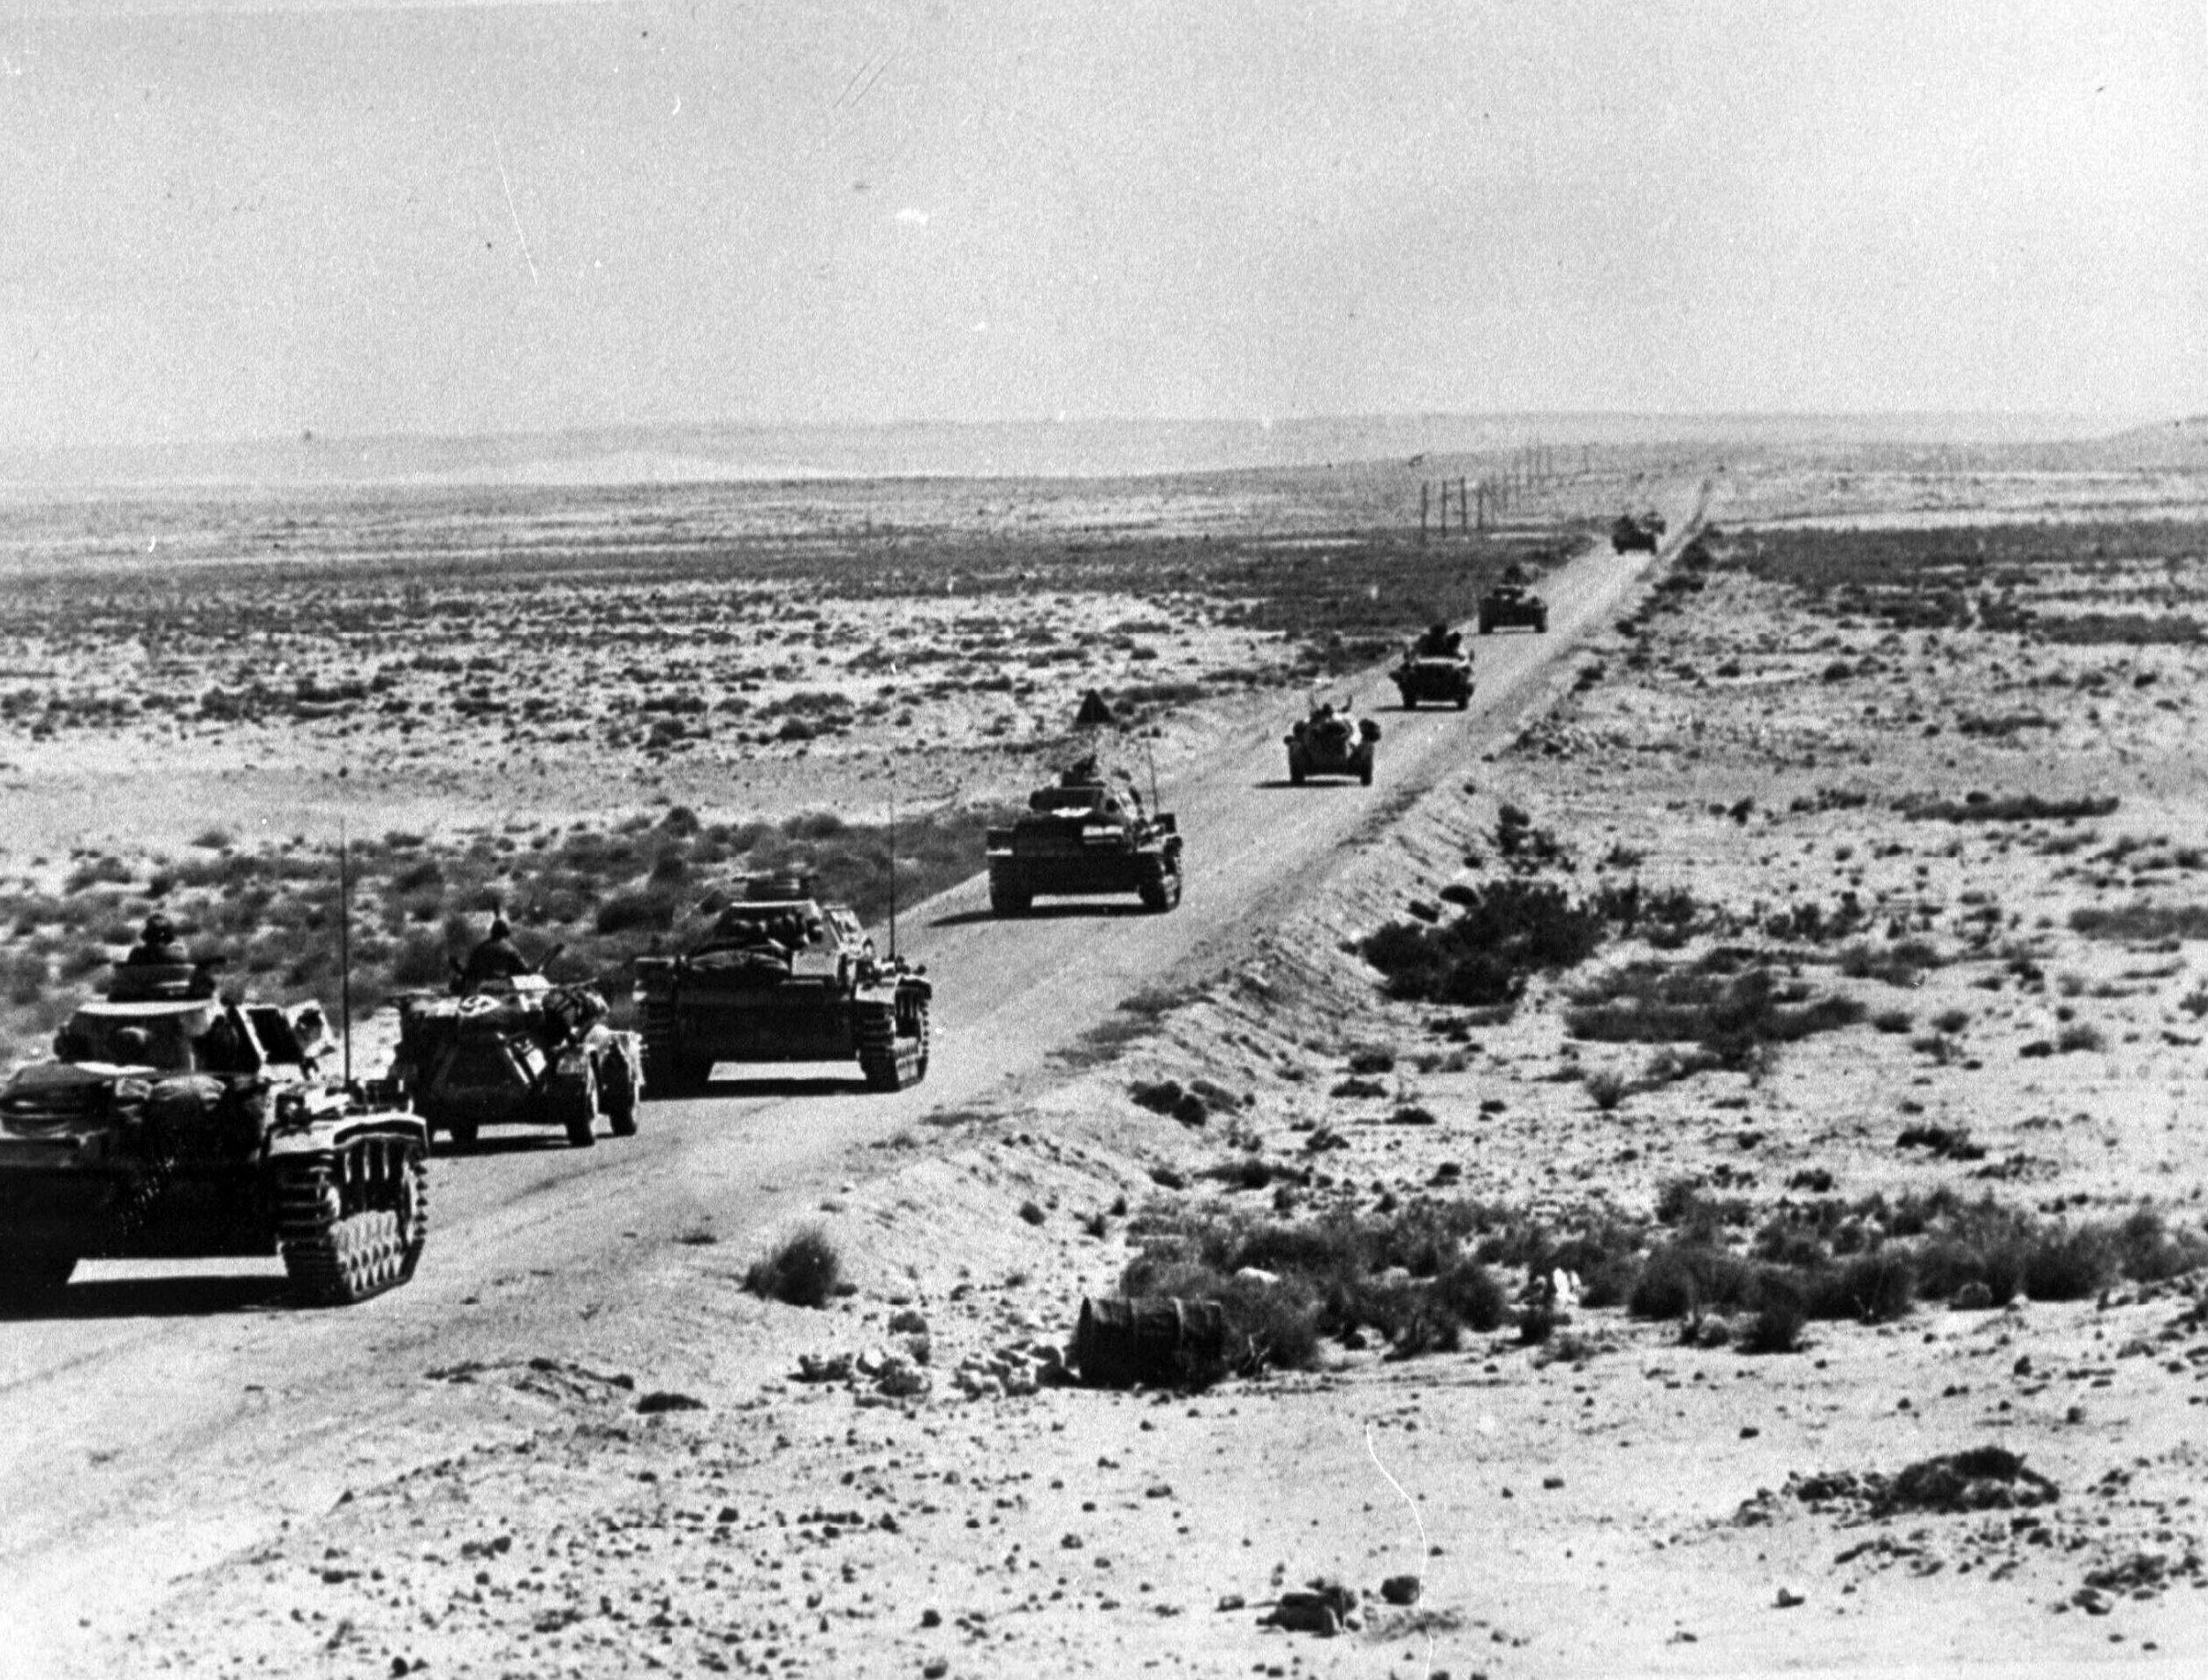 German Afrika Korps armored column advances across Libya in April, 1941. Most of the roads were unpaved “tracks” across the barren rocky landscape, subject to 90-mph sandstorms that clogged rifle breeches, buried supplies and equipment, and inflamed eyes. Gasoline and water shortages were also a constant problem.